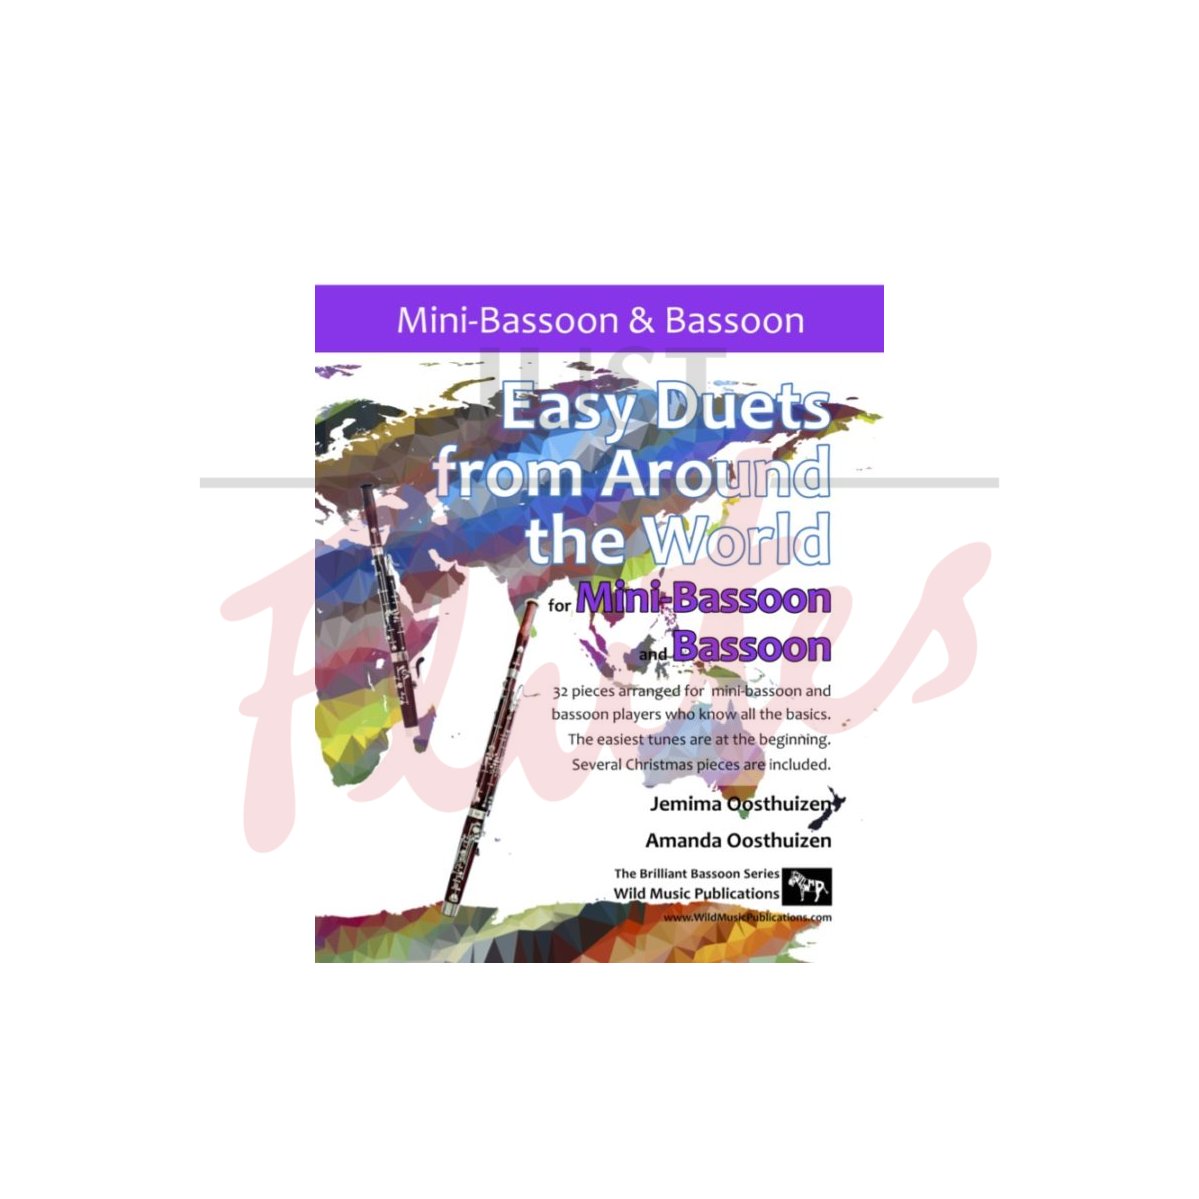 Easy Duets from Around the World for Mini-Bassoon and Bassoon